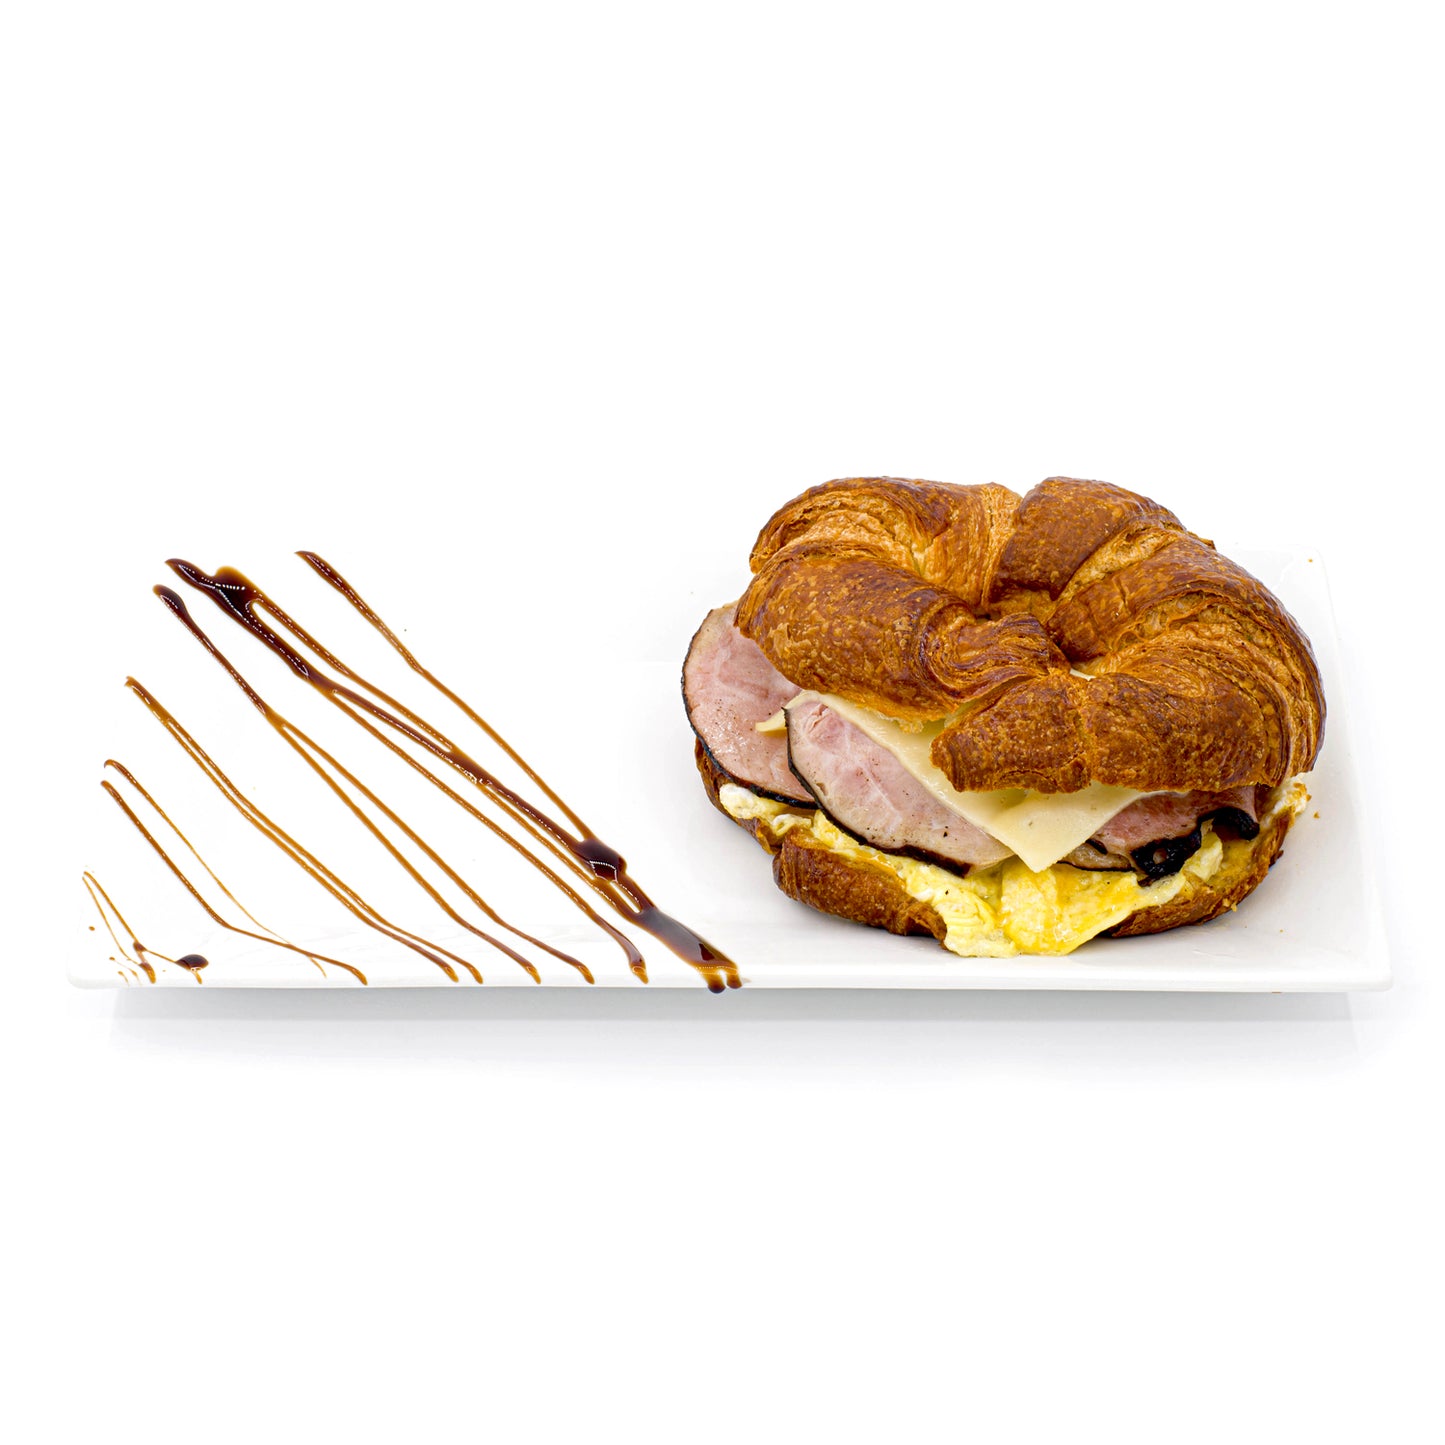 Ham and Cheese Croissant Sandwich